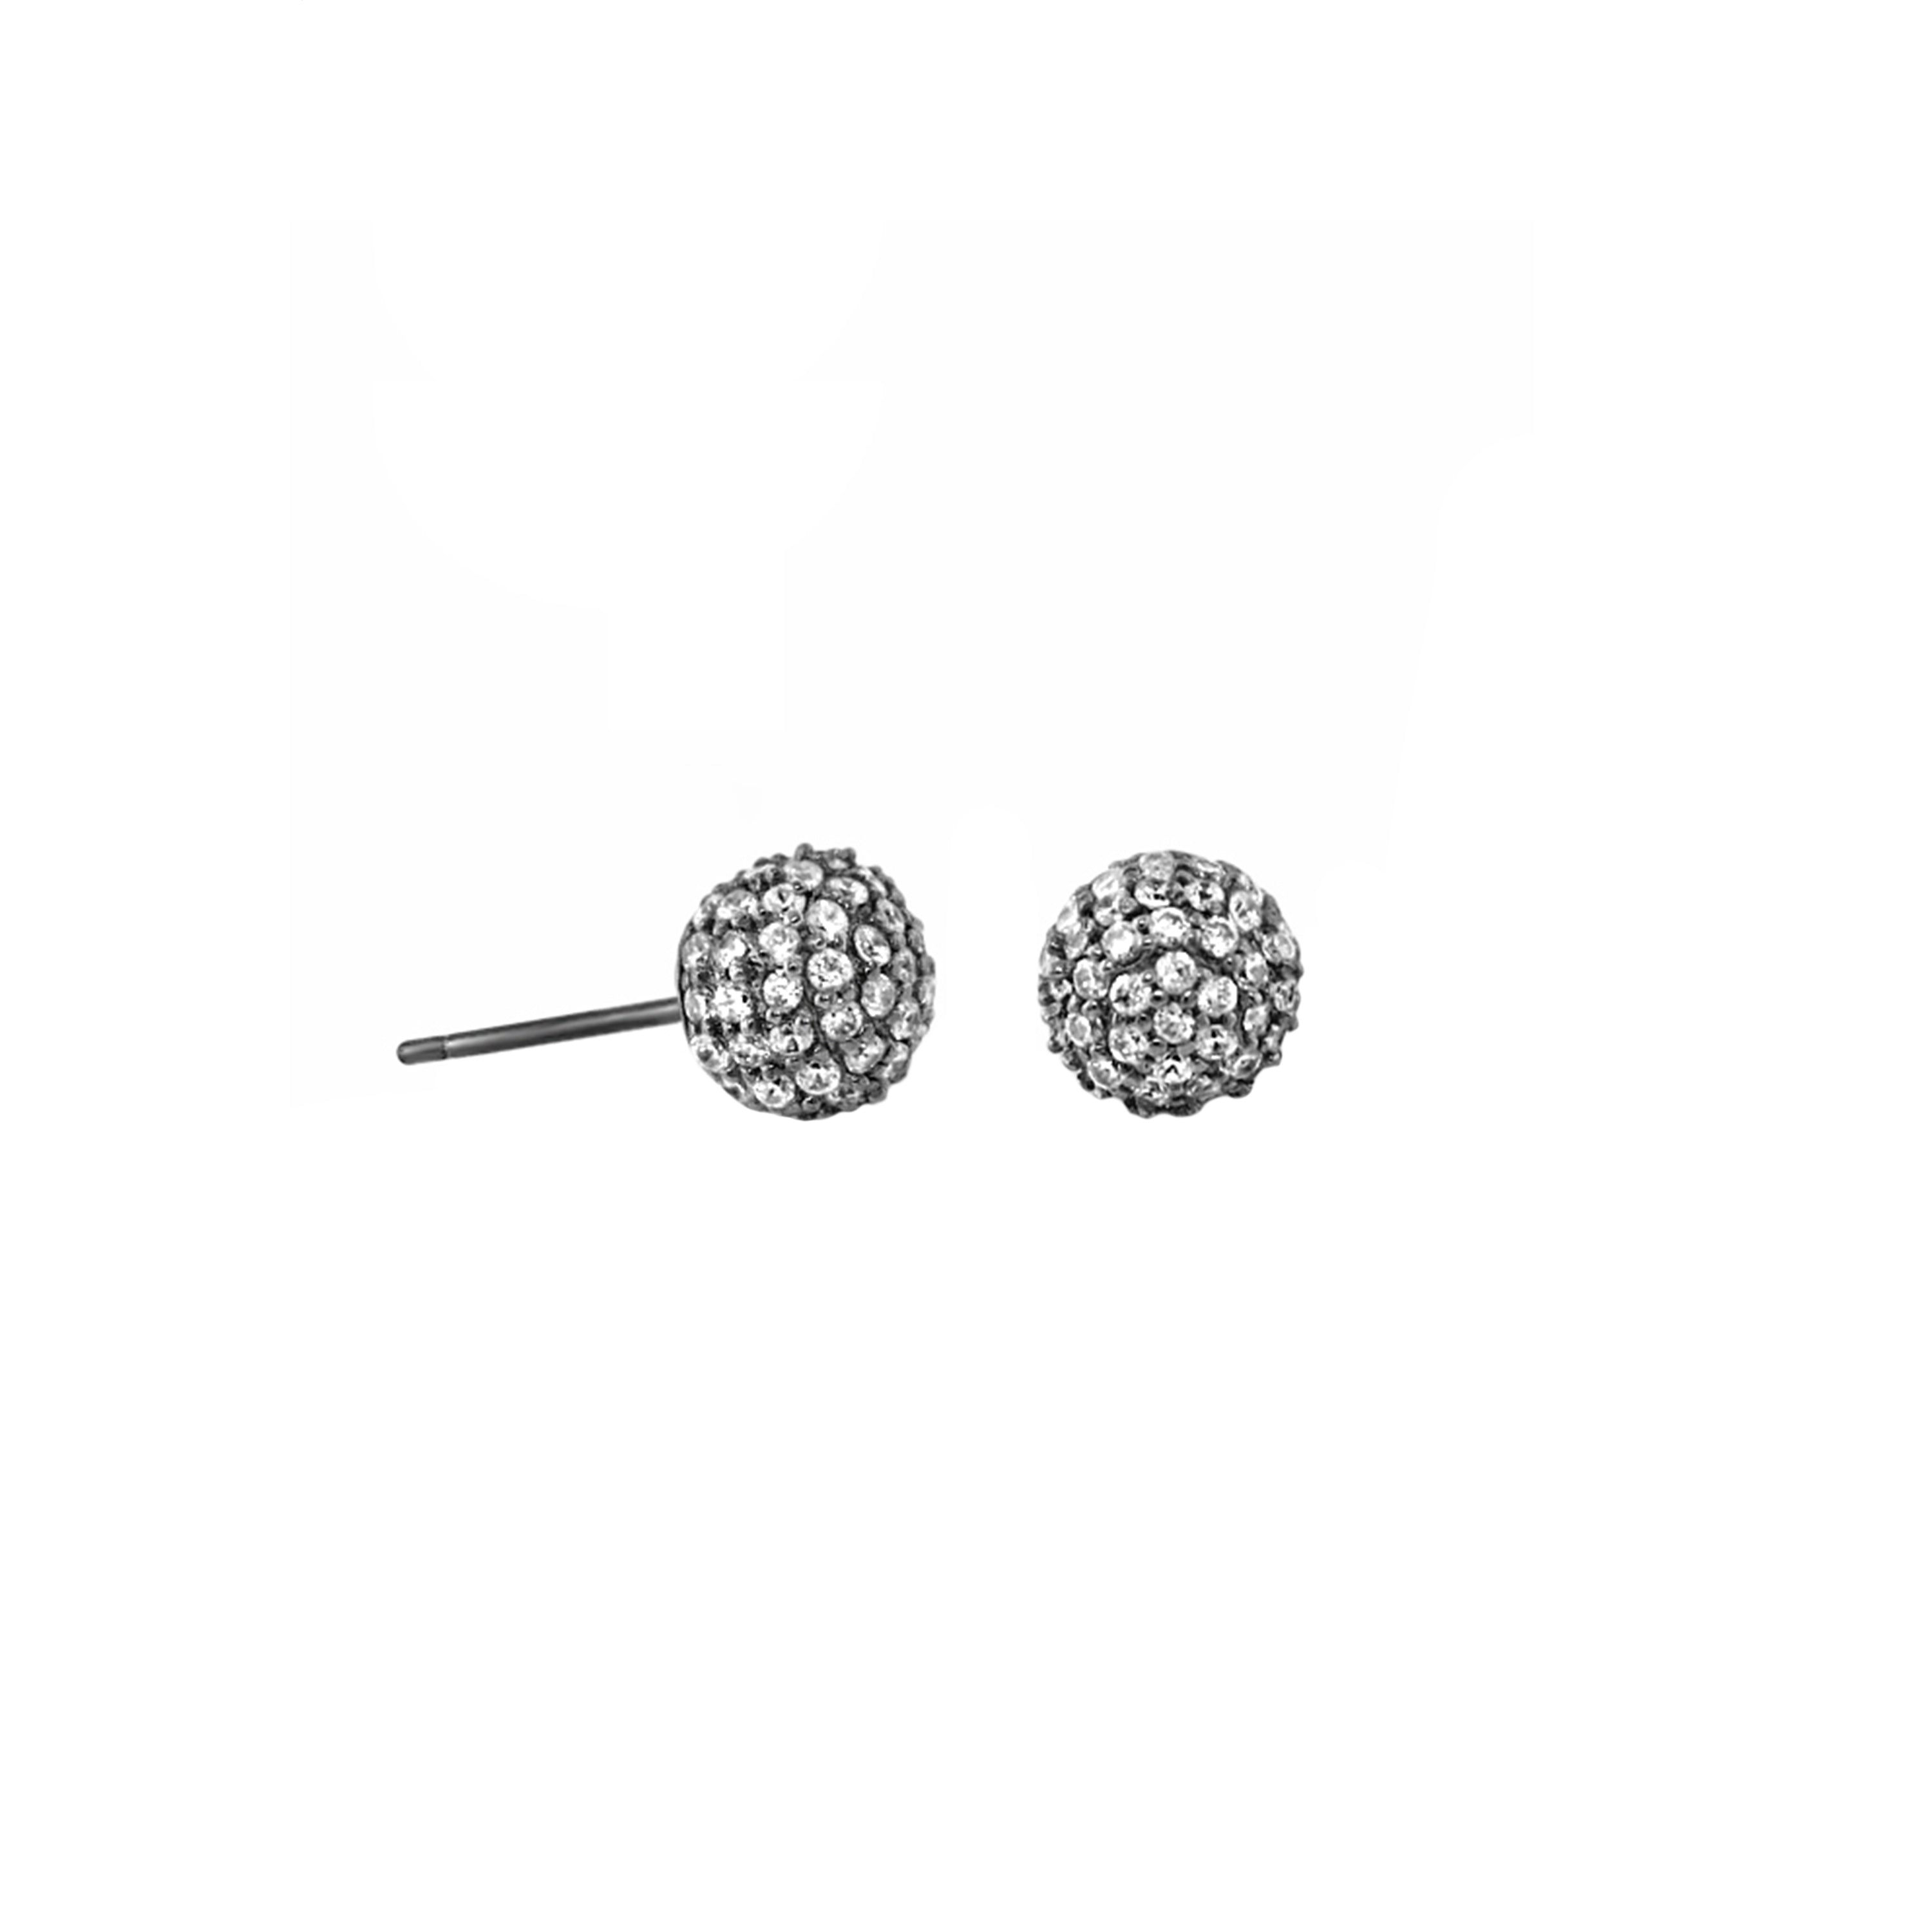 Glamour Pave .925 Earrings